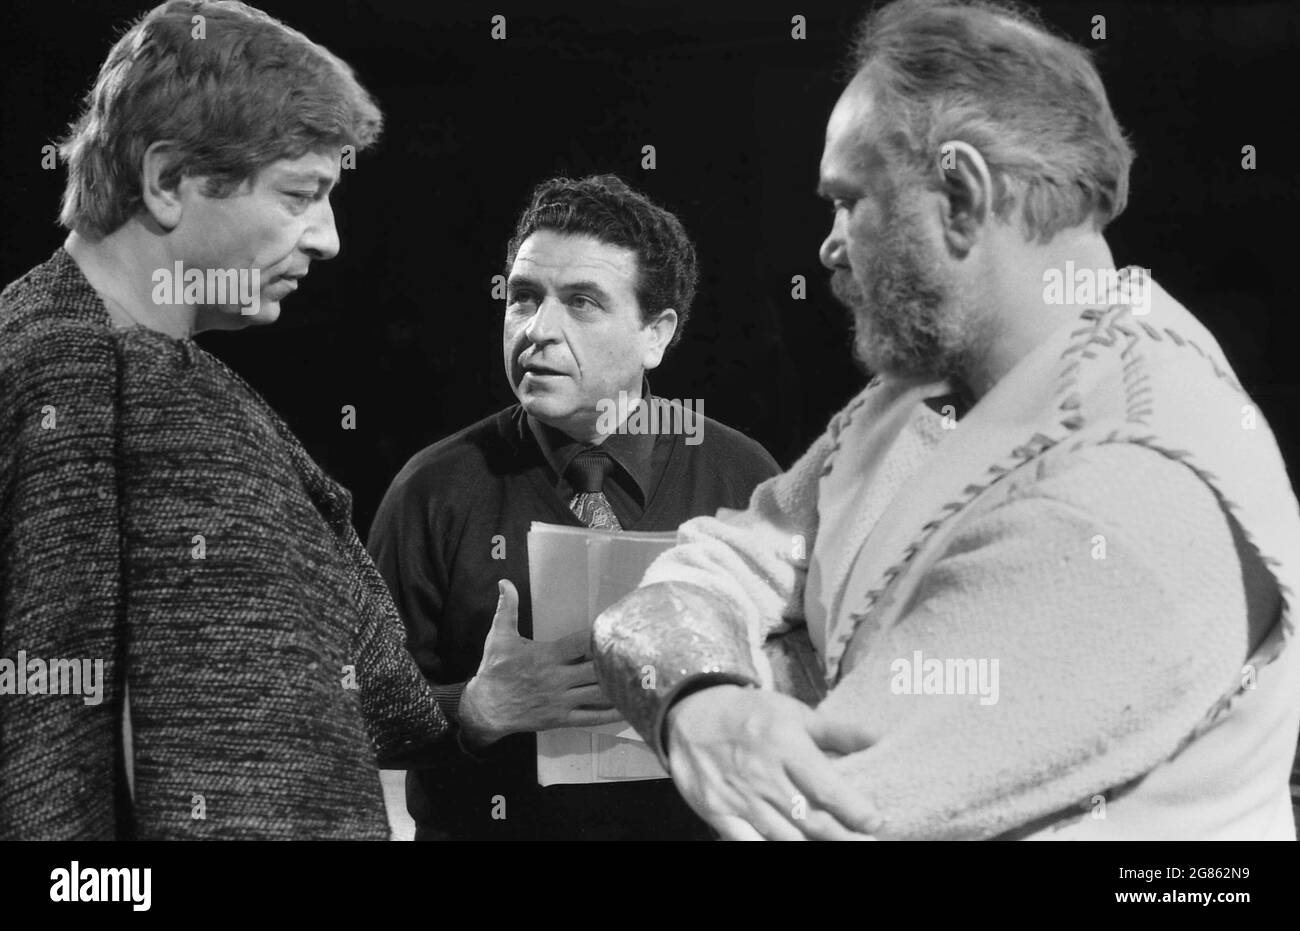 Romania, approx. 1979. Actors Ion Dichiseanu & G. Constantin with director Gheorghe Vitanidis (center) during the production of the movie 'Burebista'. Stock Photo